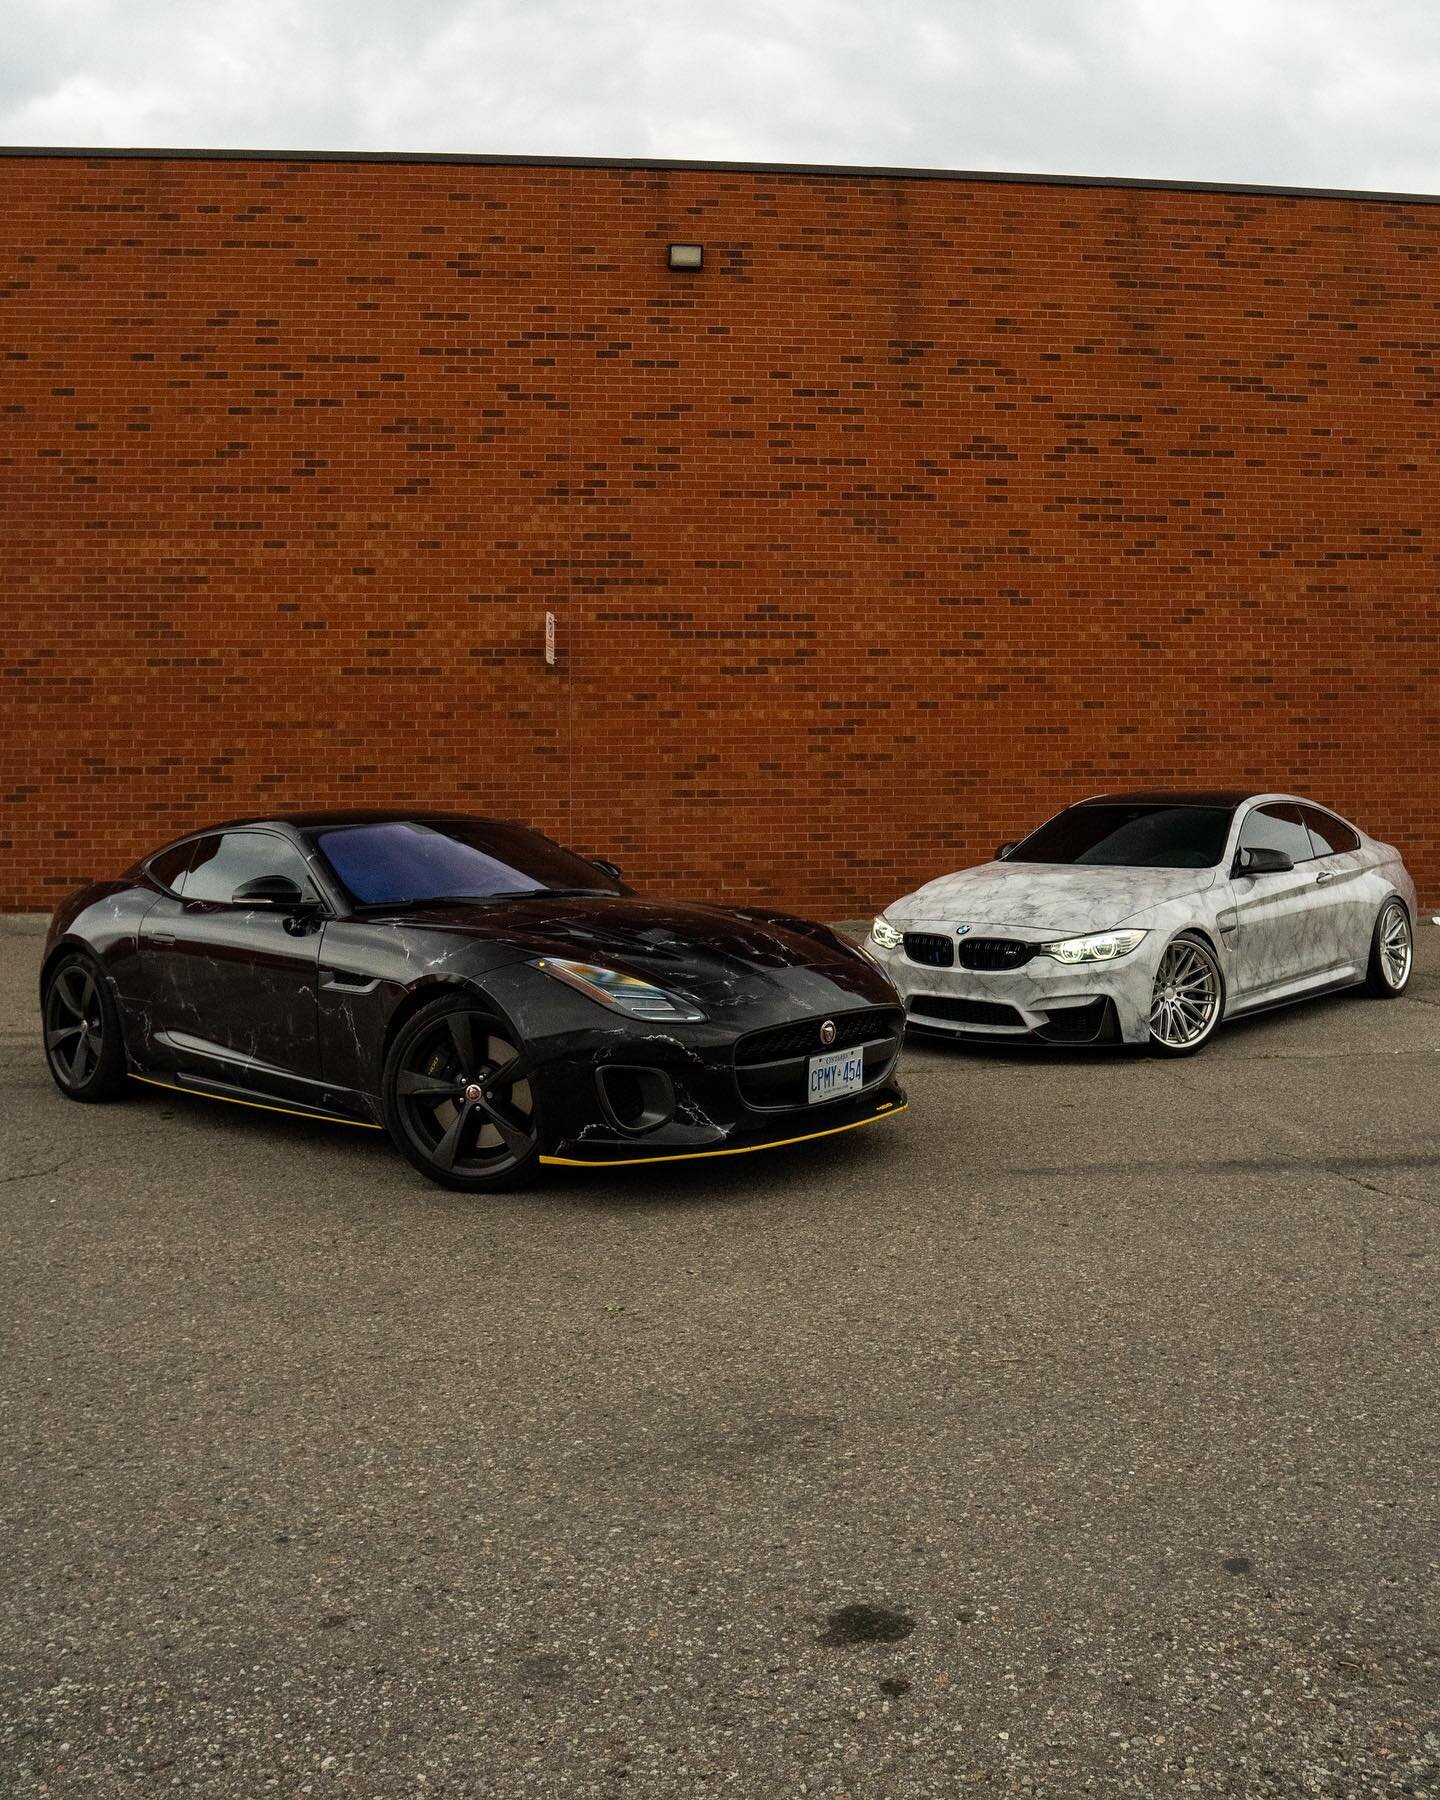 Loosing your marbles? We know we are! 

Twinning with some black and white marble patterns done one the Jaguar F-Type and BMW M4 for @firstplace

What design suits your lifestyle? We can help.

.
Redefine What A Wrap Can Be.
@neonninedesign #neonnine